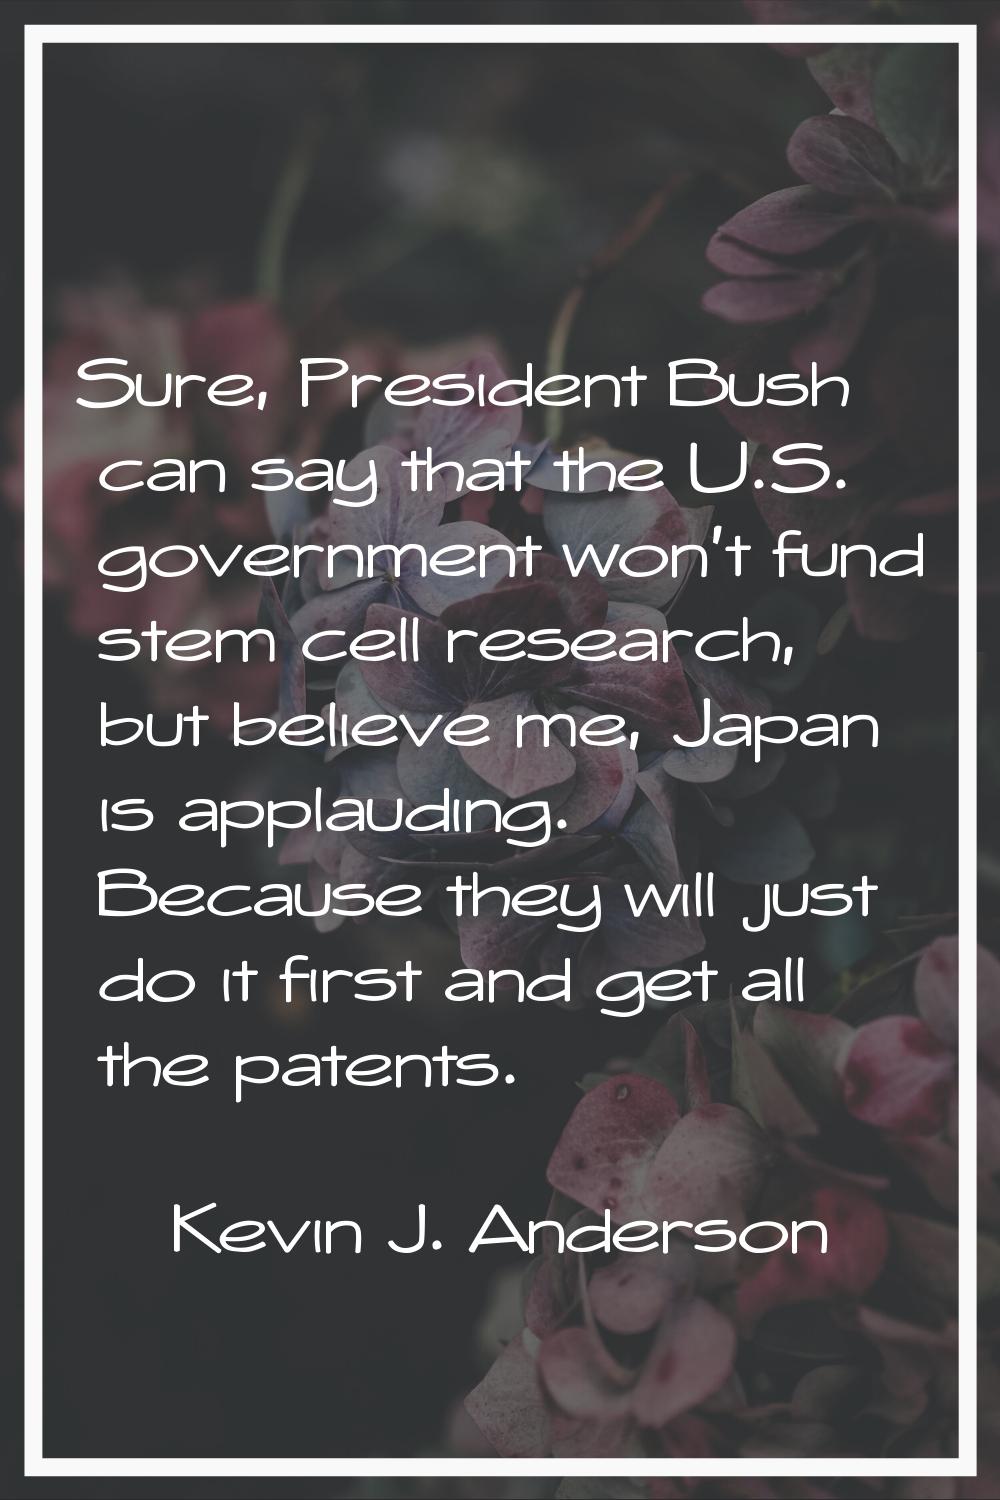 Sure, President Bush can say that the U.S. government won't fund stem cell research, but believe me